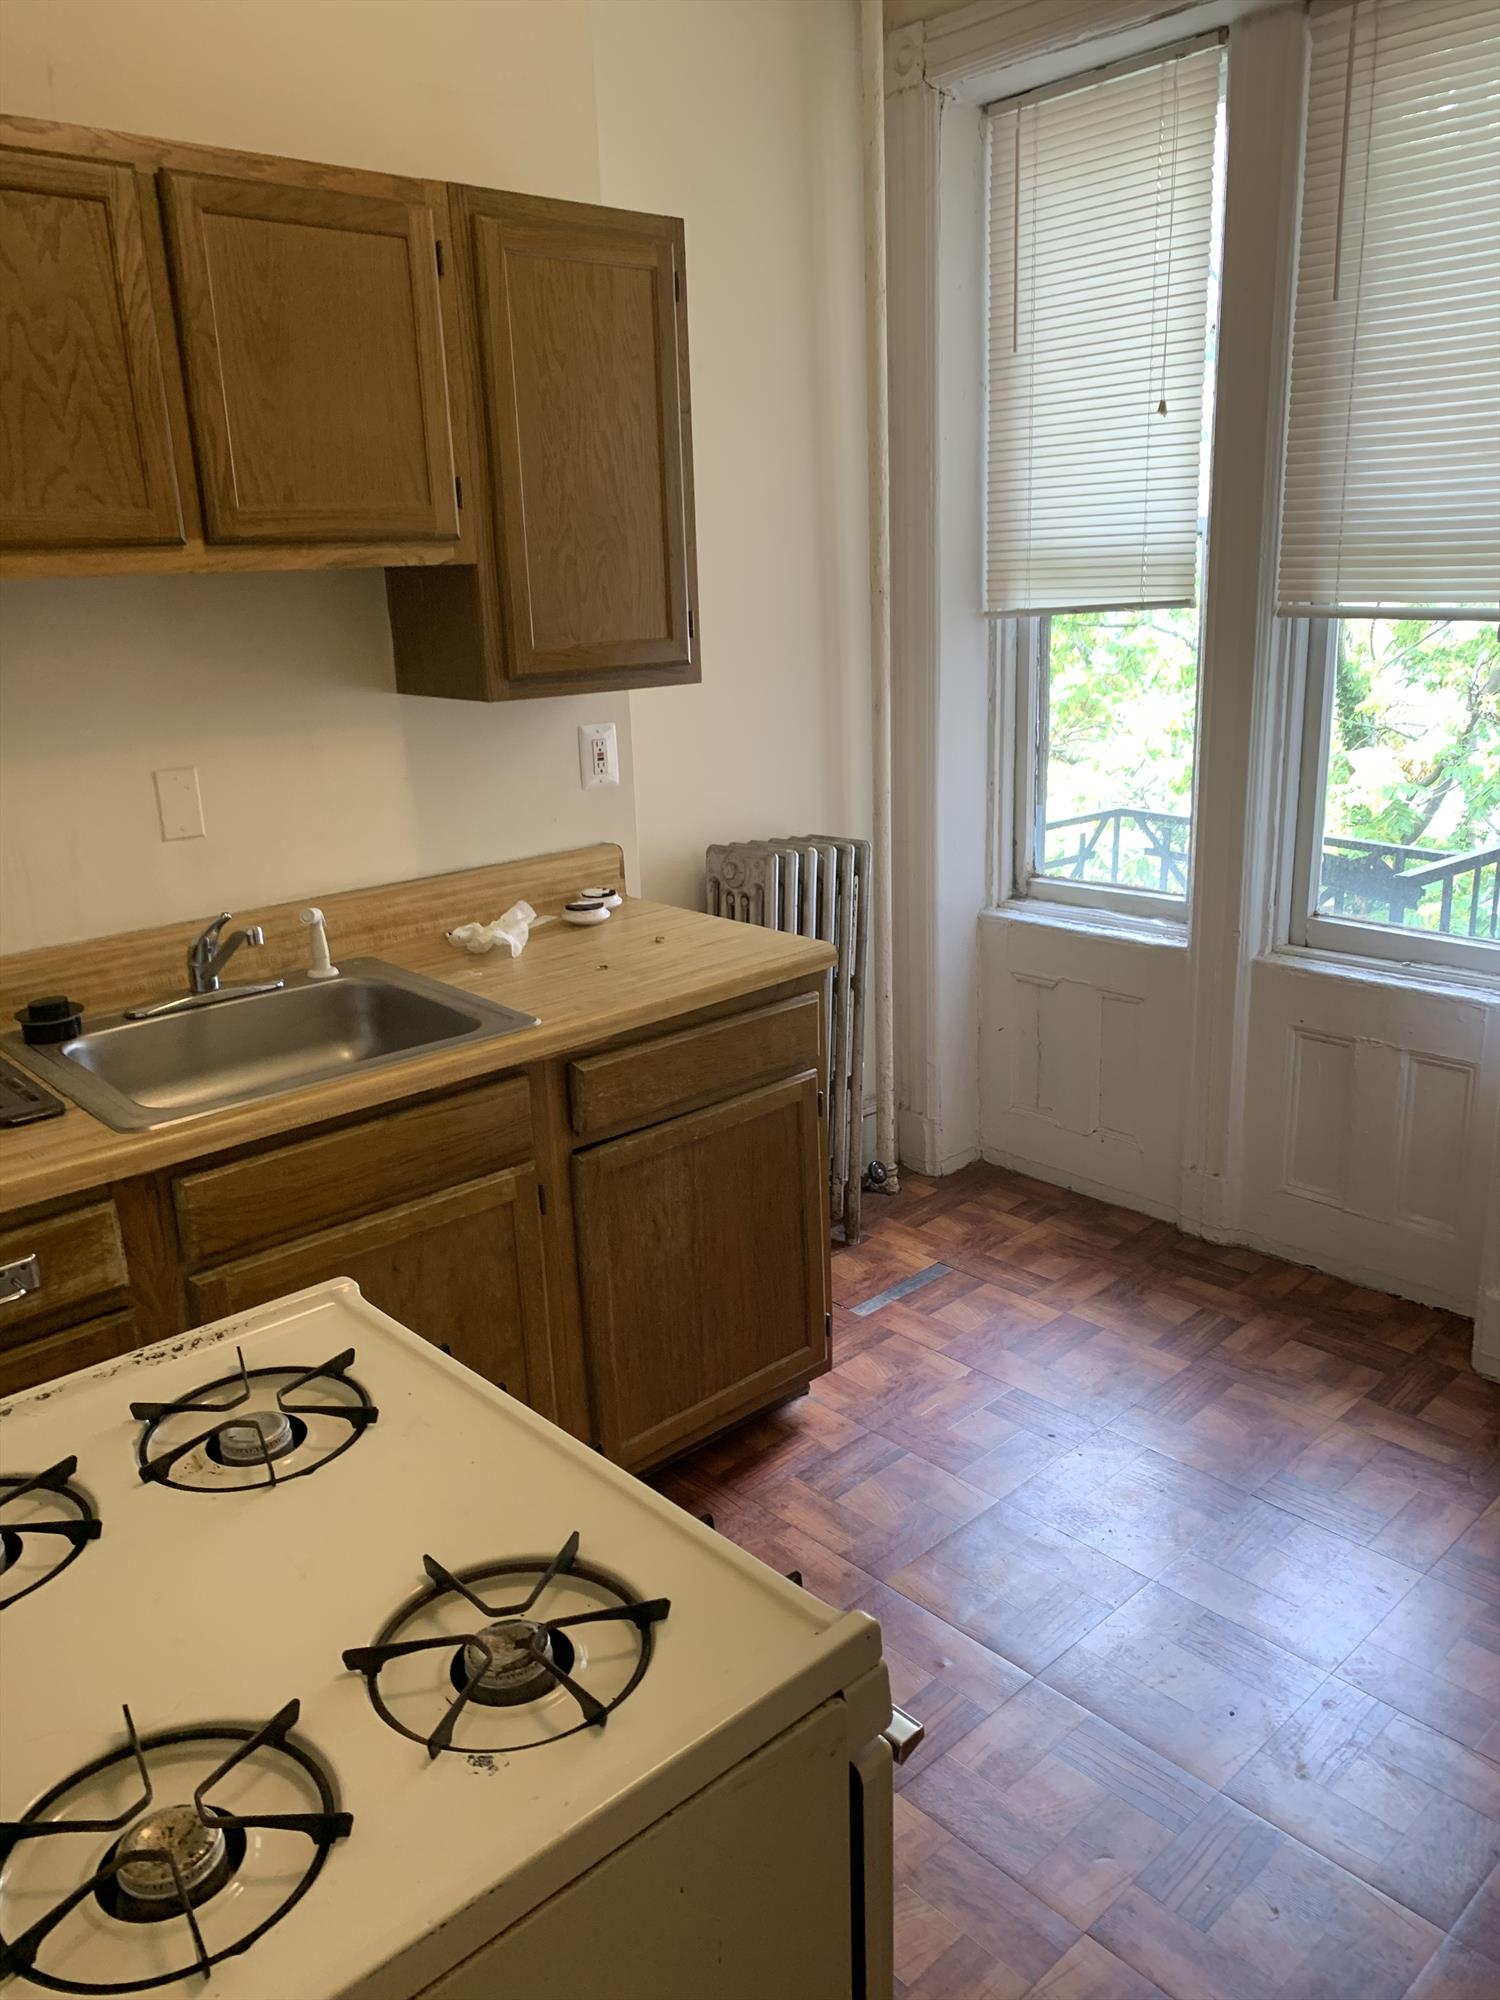 No Fee! You must see this large one bedroom one bath ideal location!
Hardwood floors throughout!
Steps to path train! Must See! 

Available for vacant (landlord flexible on move-in date)

Two months free rent equals 1416 per month rent

